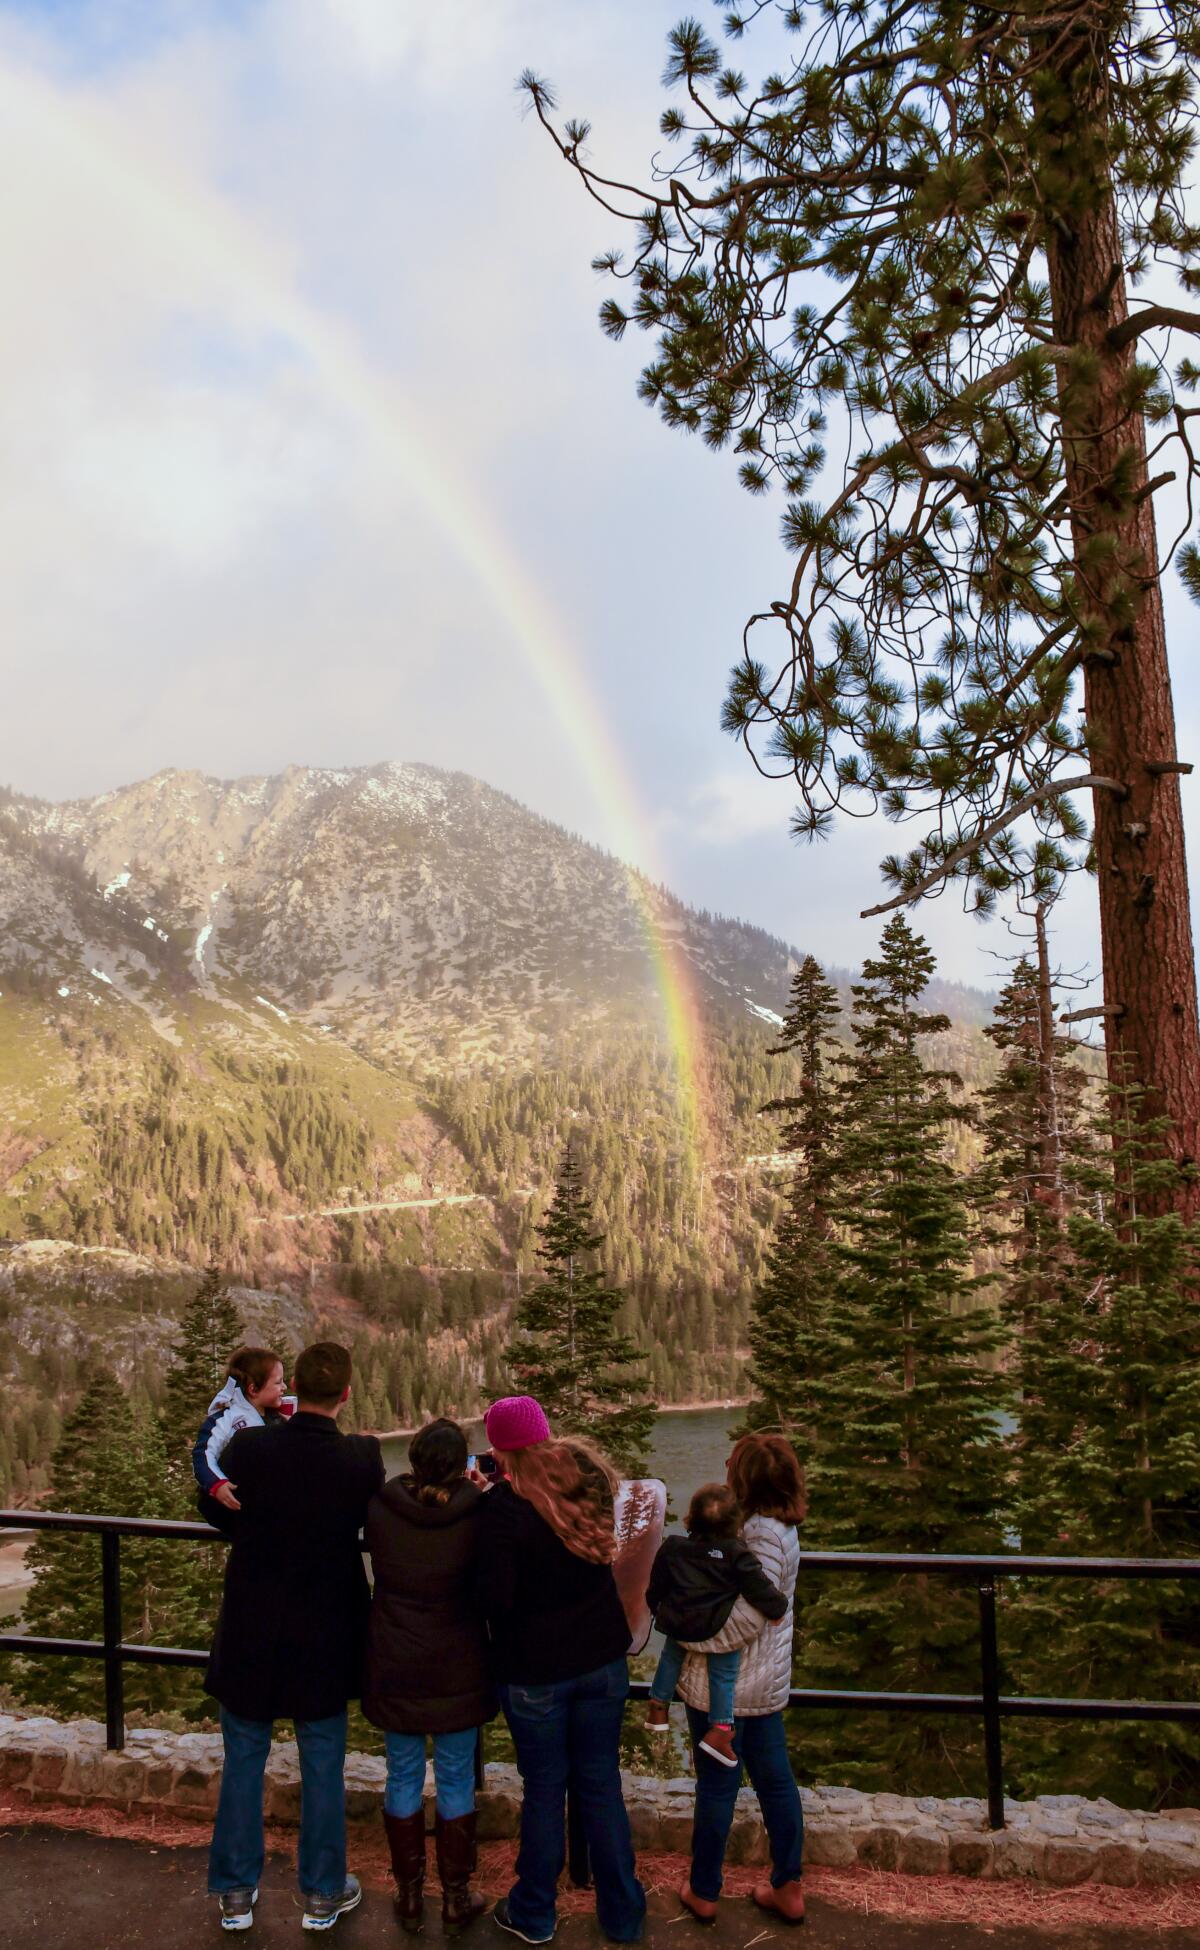 Four adults, two of them holding small children, look out at a mountain lake and a rainbow.